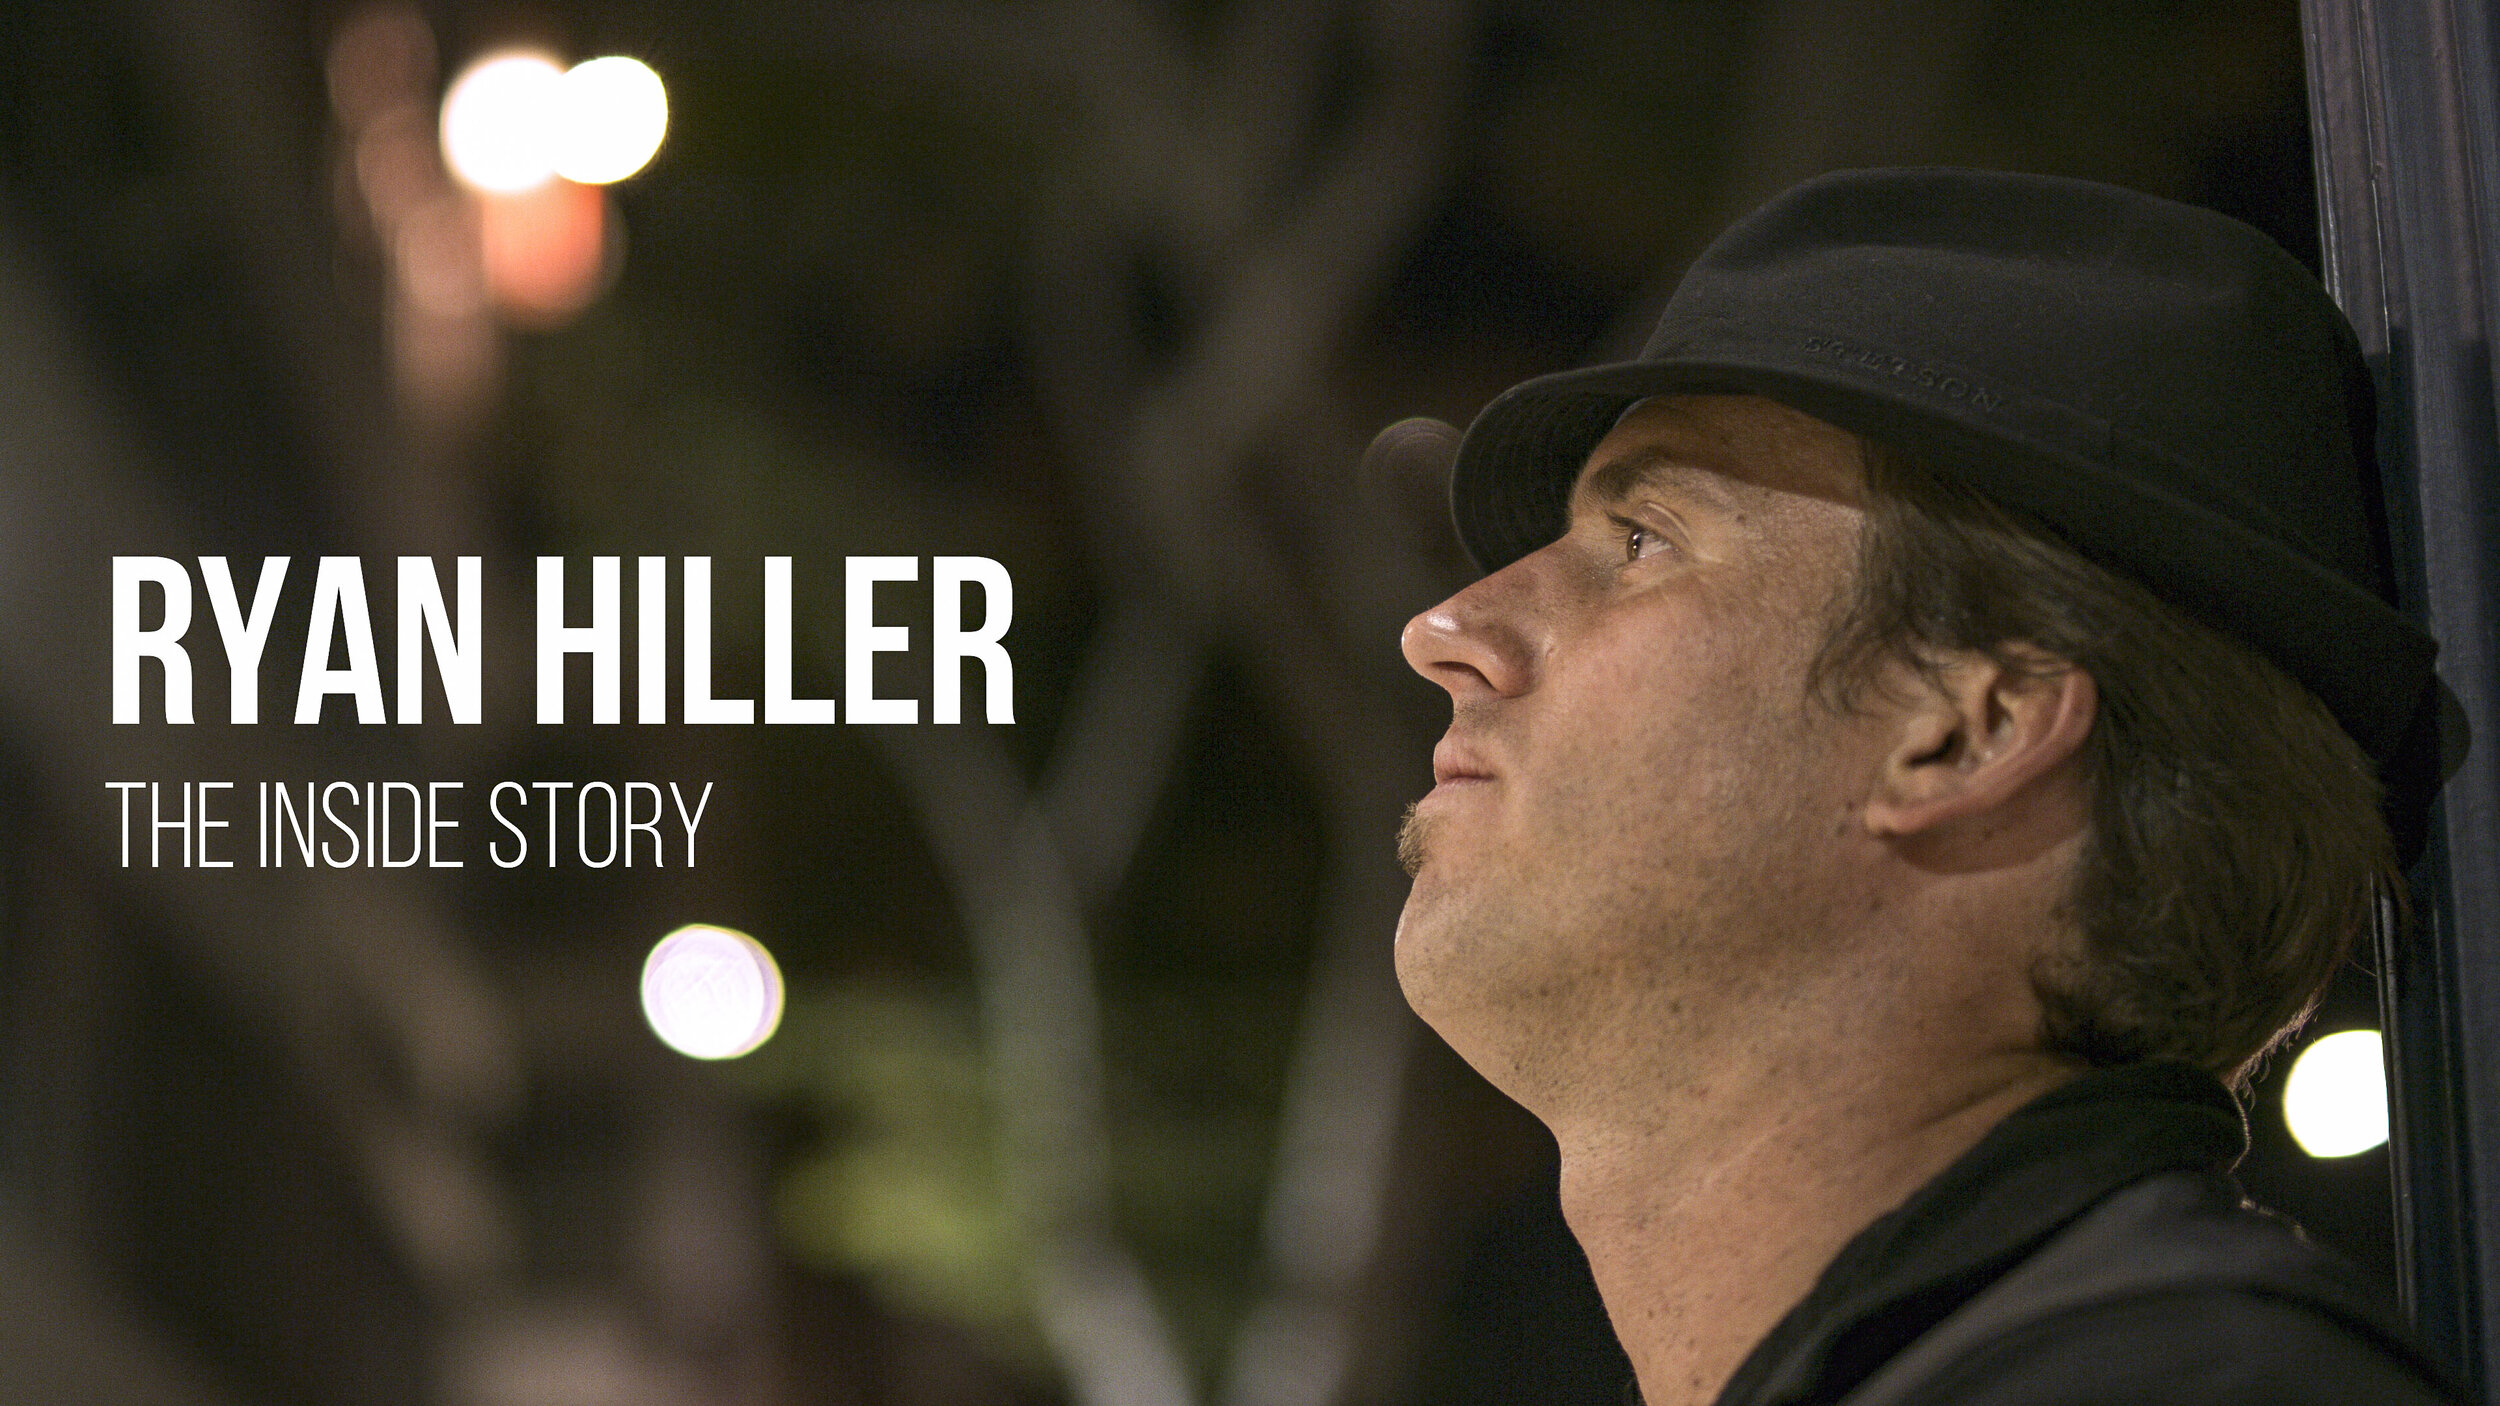 MMP interview with Ryan Hiller "The Inside Story"